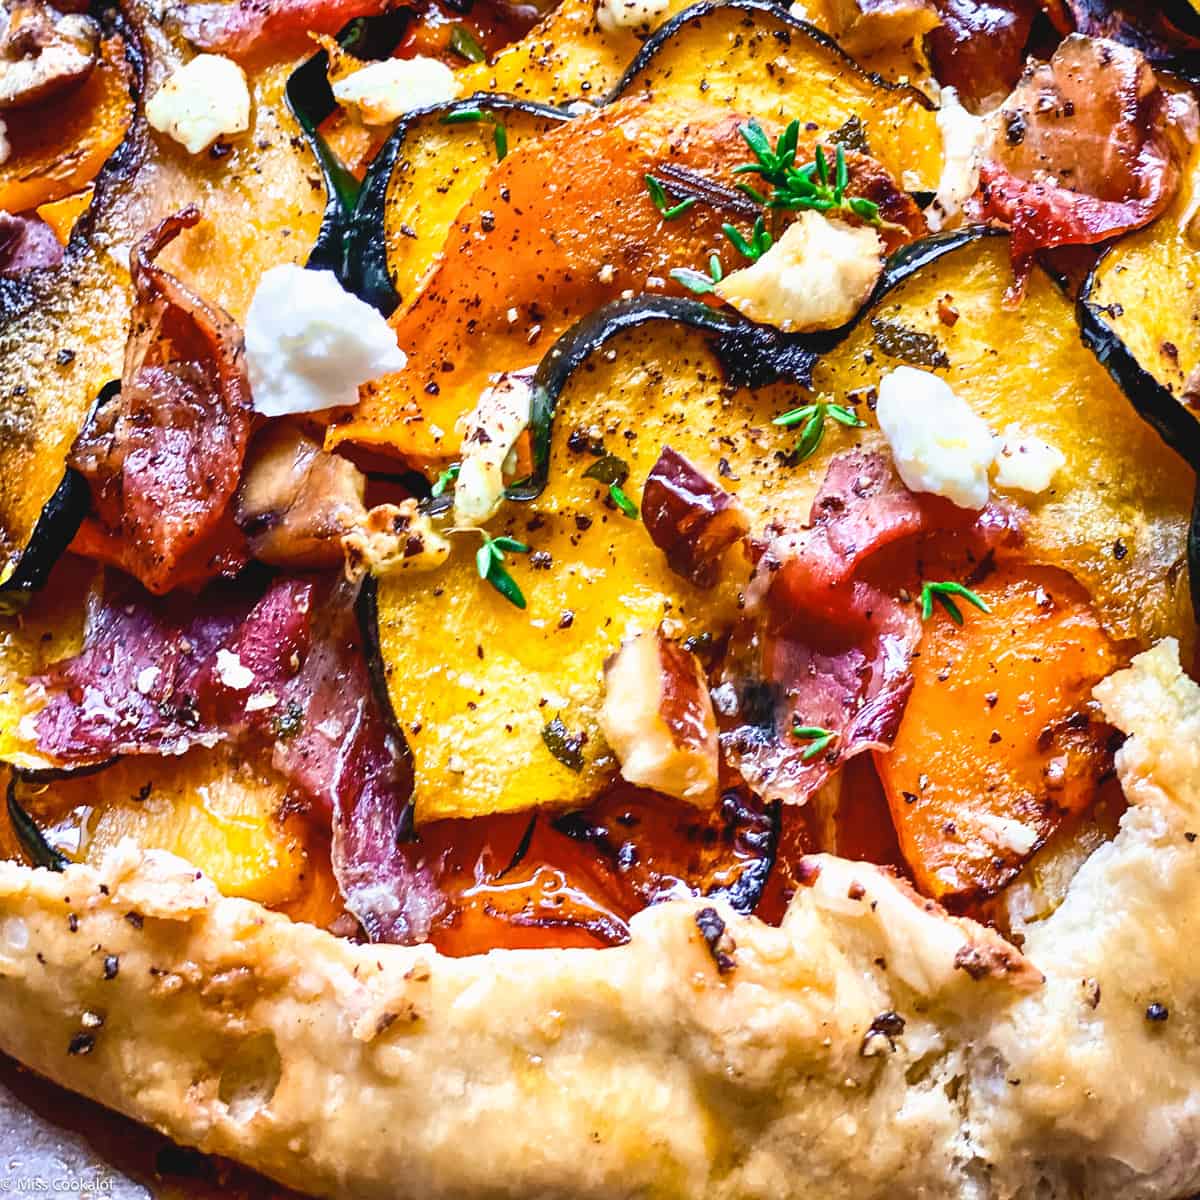 A butternut squash galette with prosciutto and maple syrup on parchment paper.